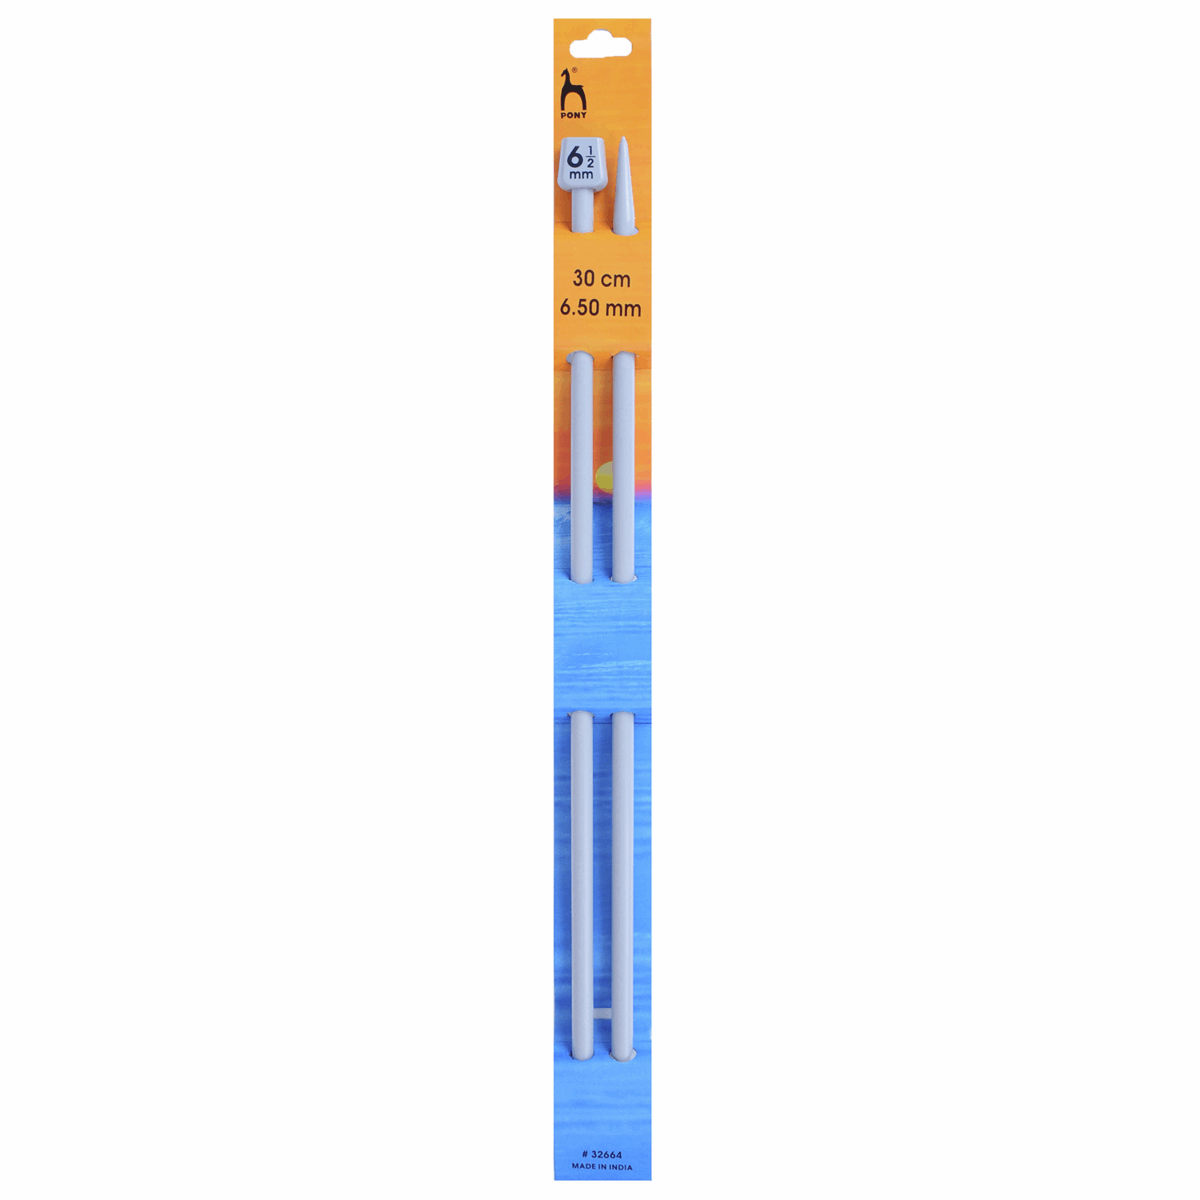 PONY Classic Single-Ended Knitting Pins - 30cm x 6.50mm